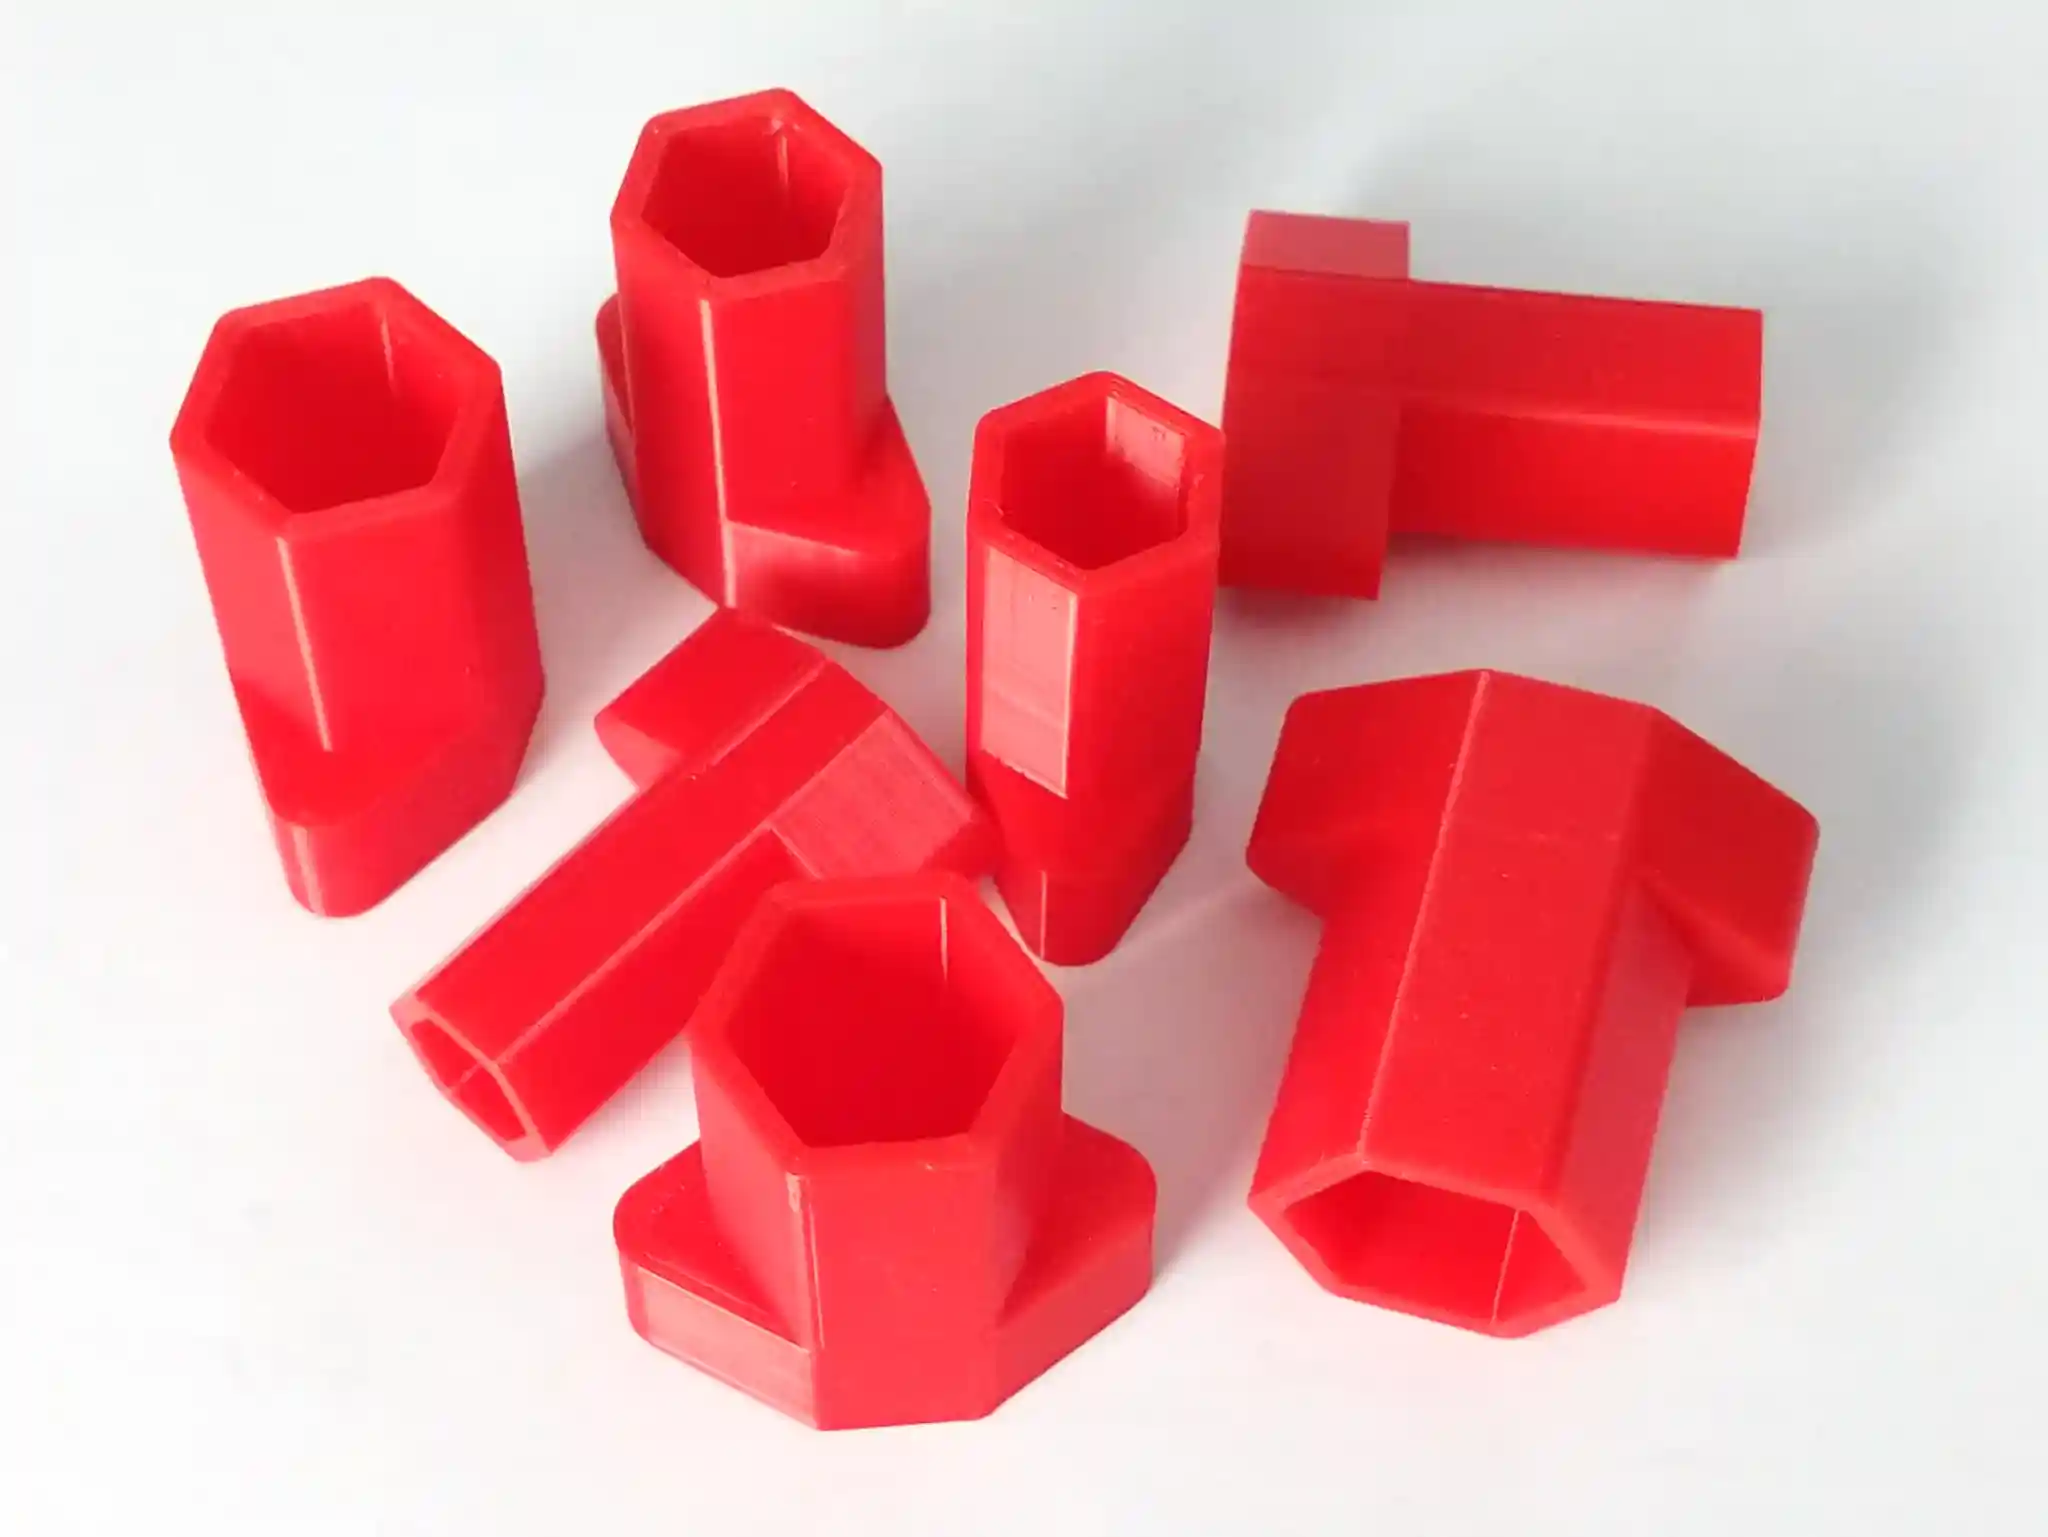 A collection of hex sockets for handheld use, printed in red PLA